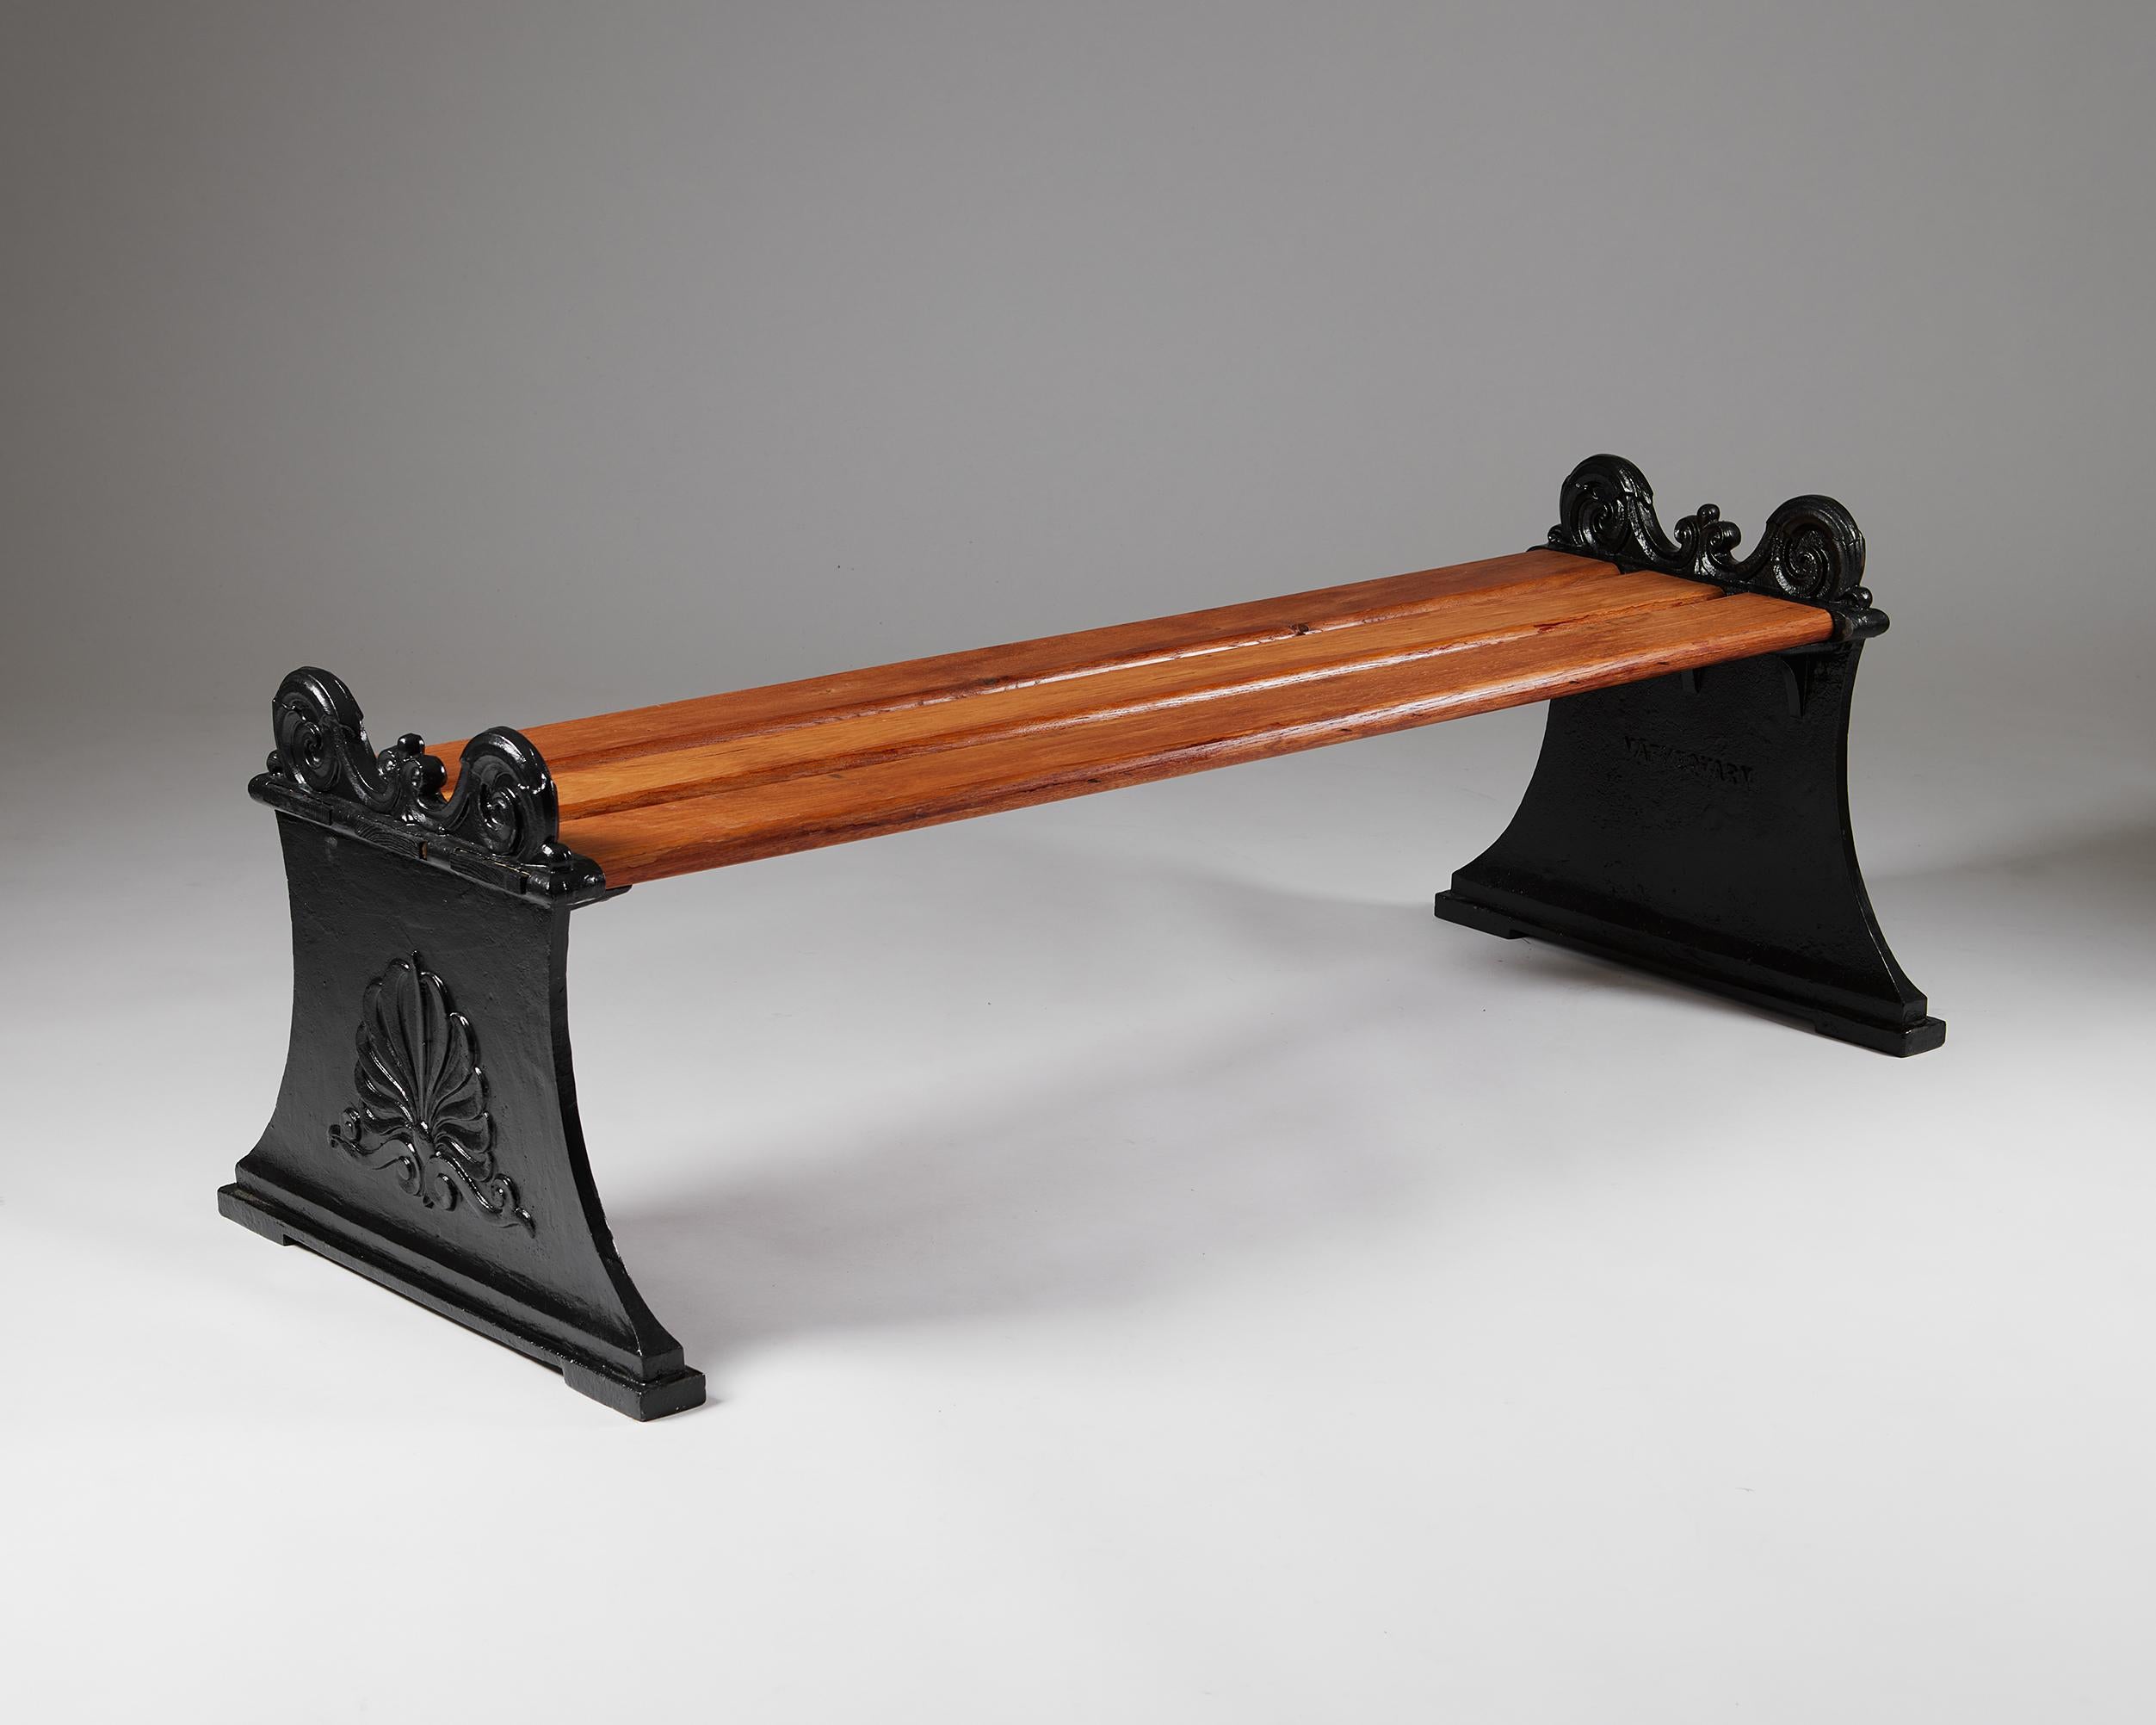 Bench with a pair of gables ‘Parkbänk No 1’ designed by Folke Bensow for Näfveqvarn,
Sweden, 1920.

Cast iron and stained wood.

Folke Bensow’s ‘Parkbänk No 1’ bench is both sturdy and elegant in appearance. The neoclassical cast iron gables are